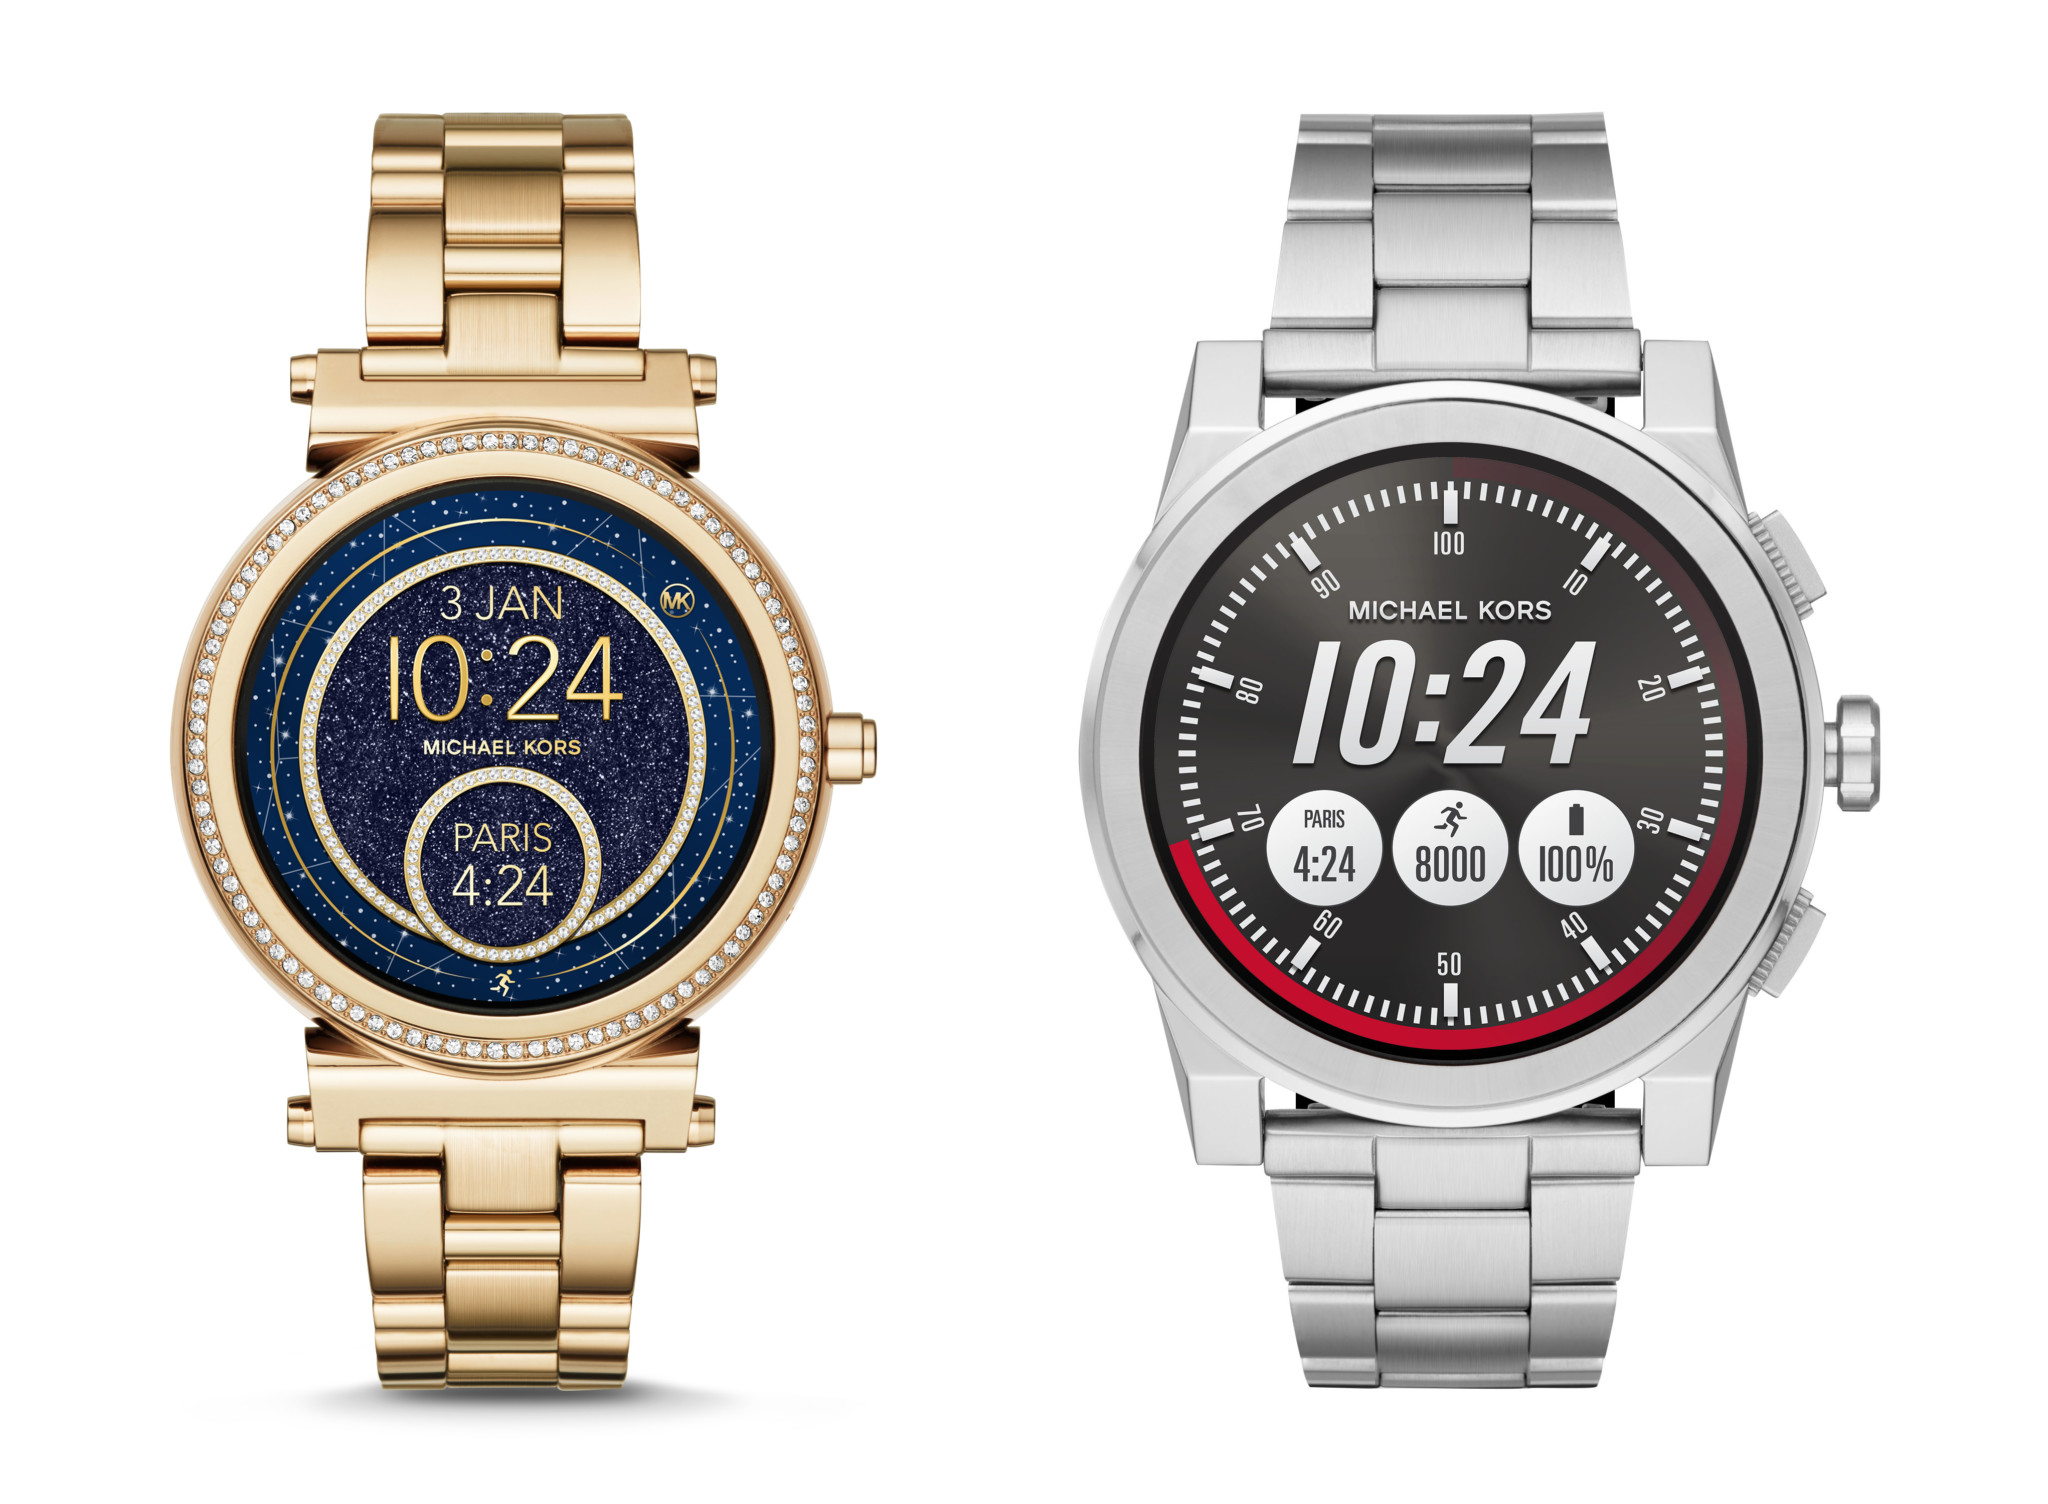 Fossil Group Doubles Number Of Doors For Its Smartwatches And Connected  Hybrids